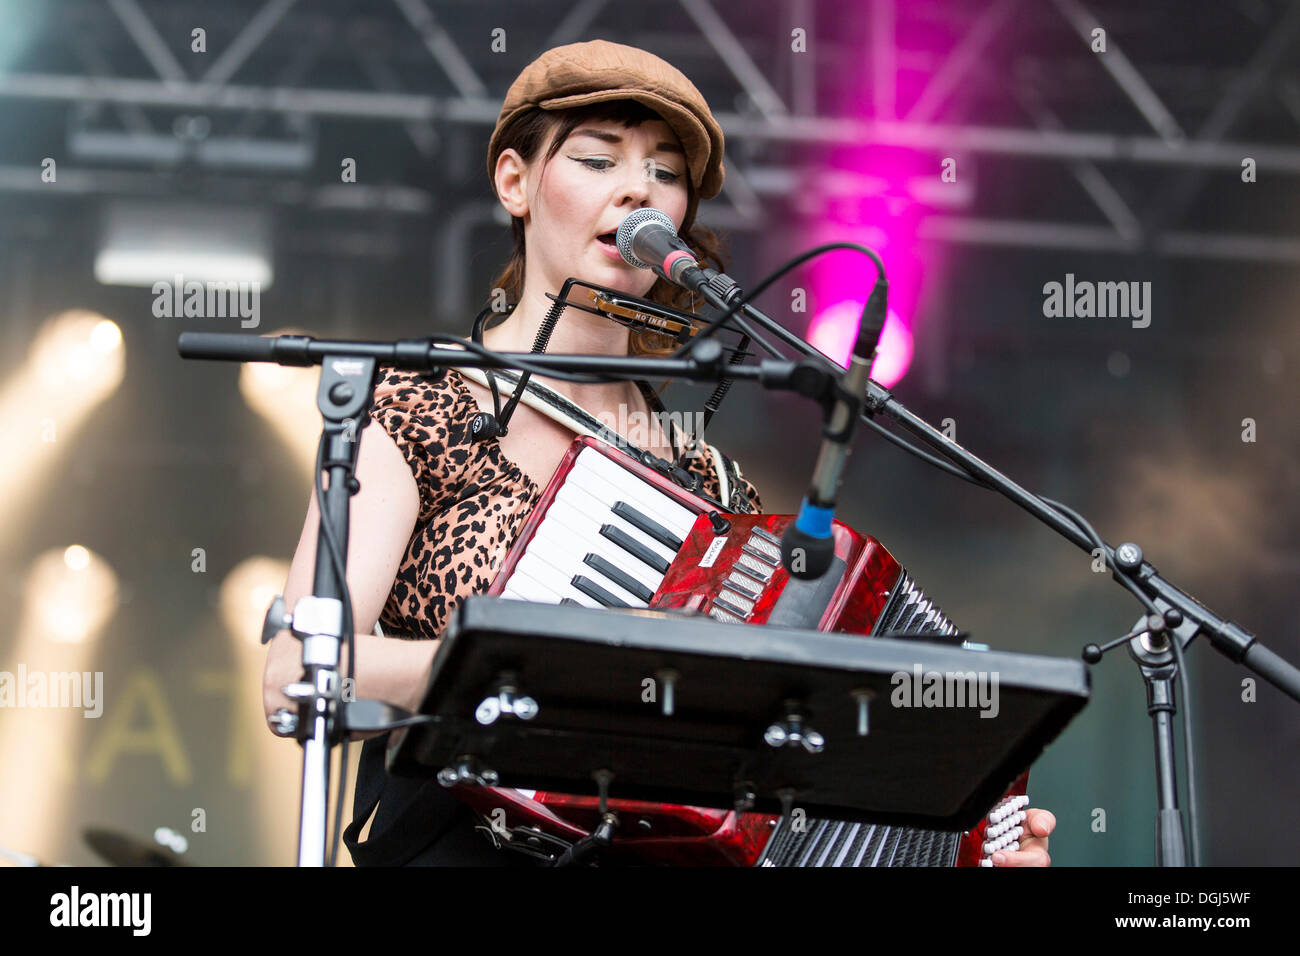 Anne Marit Bergheim with an accordion from the Norwegian girl band Katzenjammer performing live at Heitere Open Air in Zofingen Stock Photo